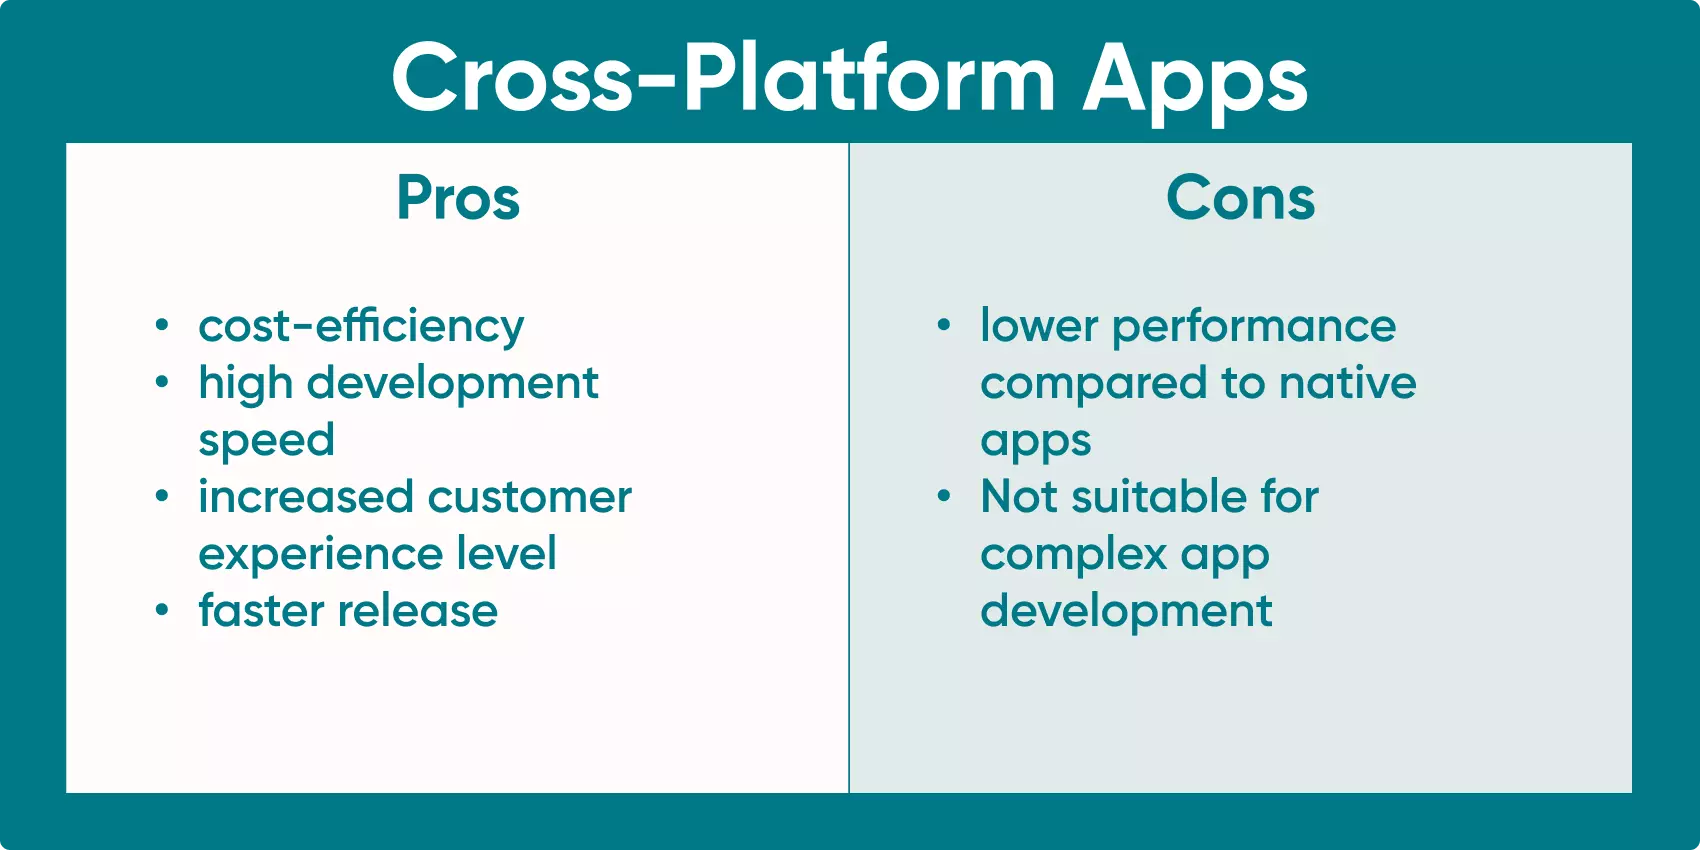 More details on the pros and cons of croos-platform apps. Read to discover the good and bad points.